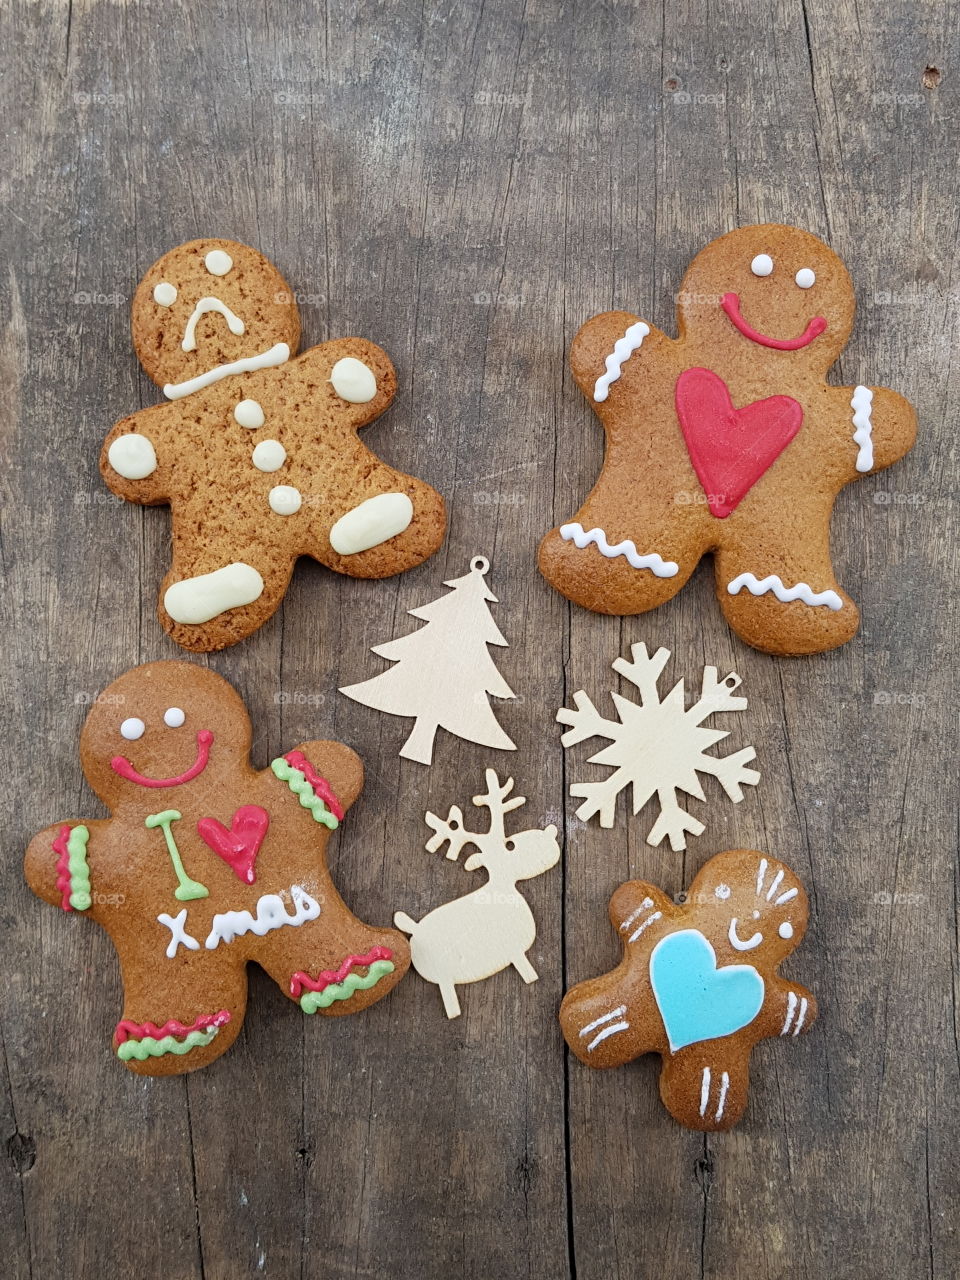 Merry Christmas with gingerbread cookies and wooden ornaments
